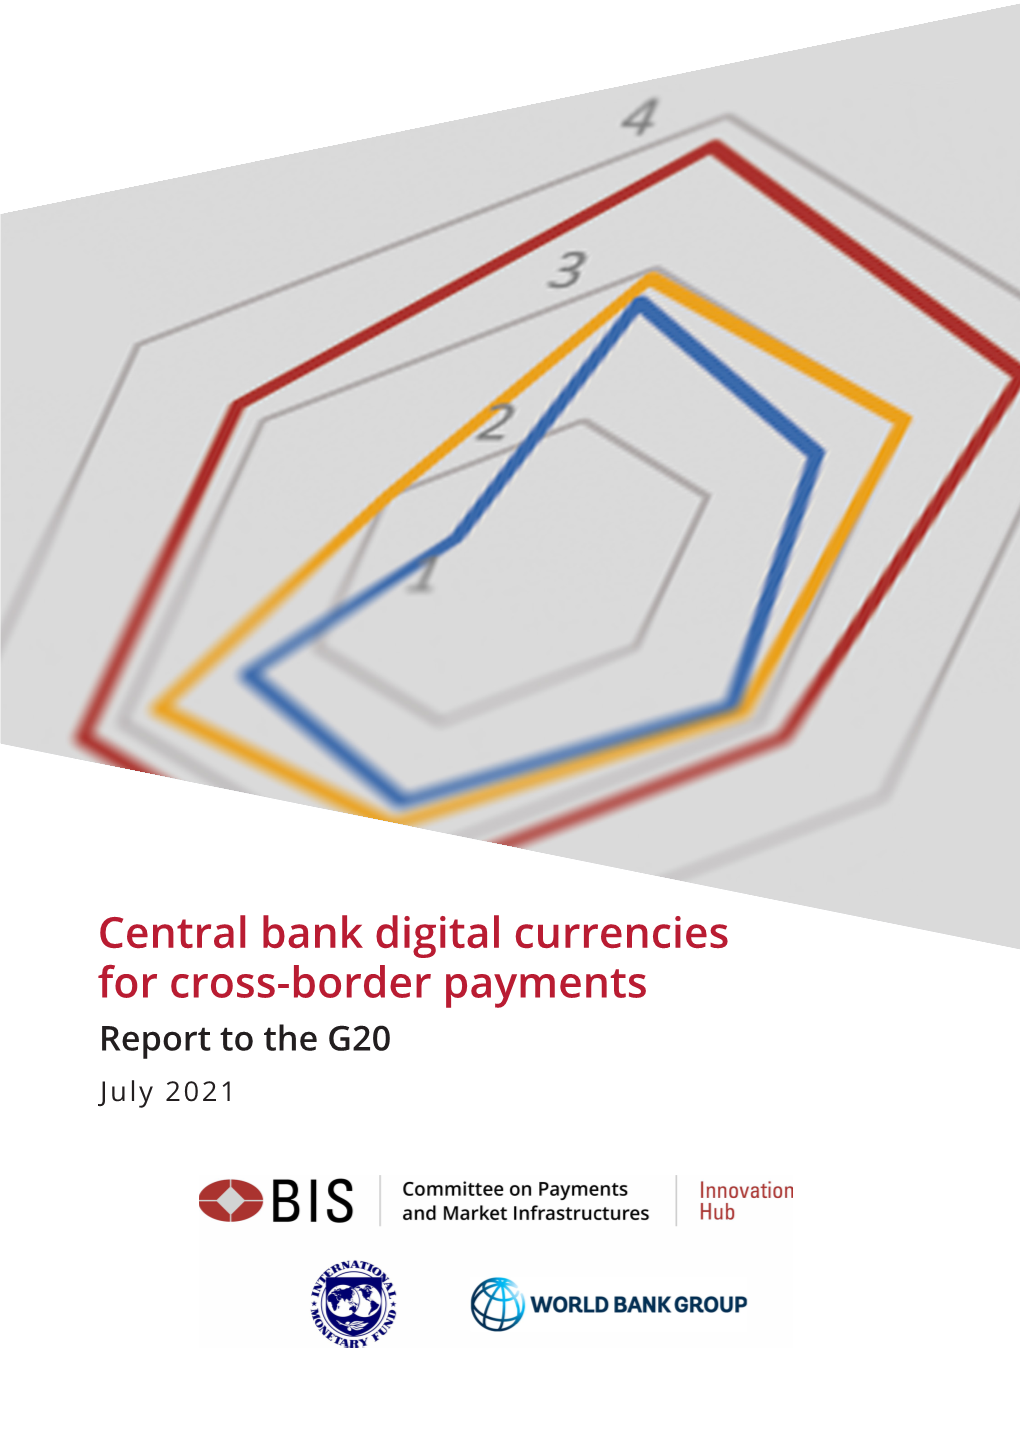 Central Bank Digital Currencies for Cross-Border Payments Report to the G20 July 2021